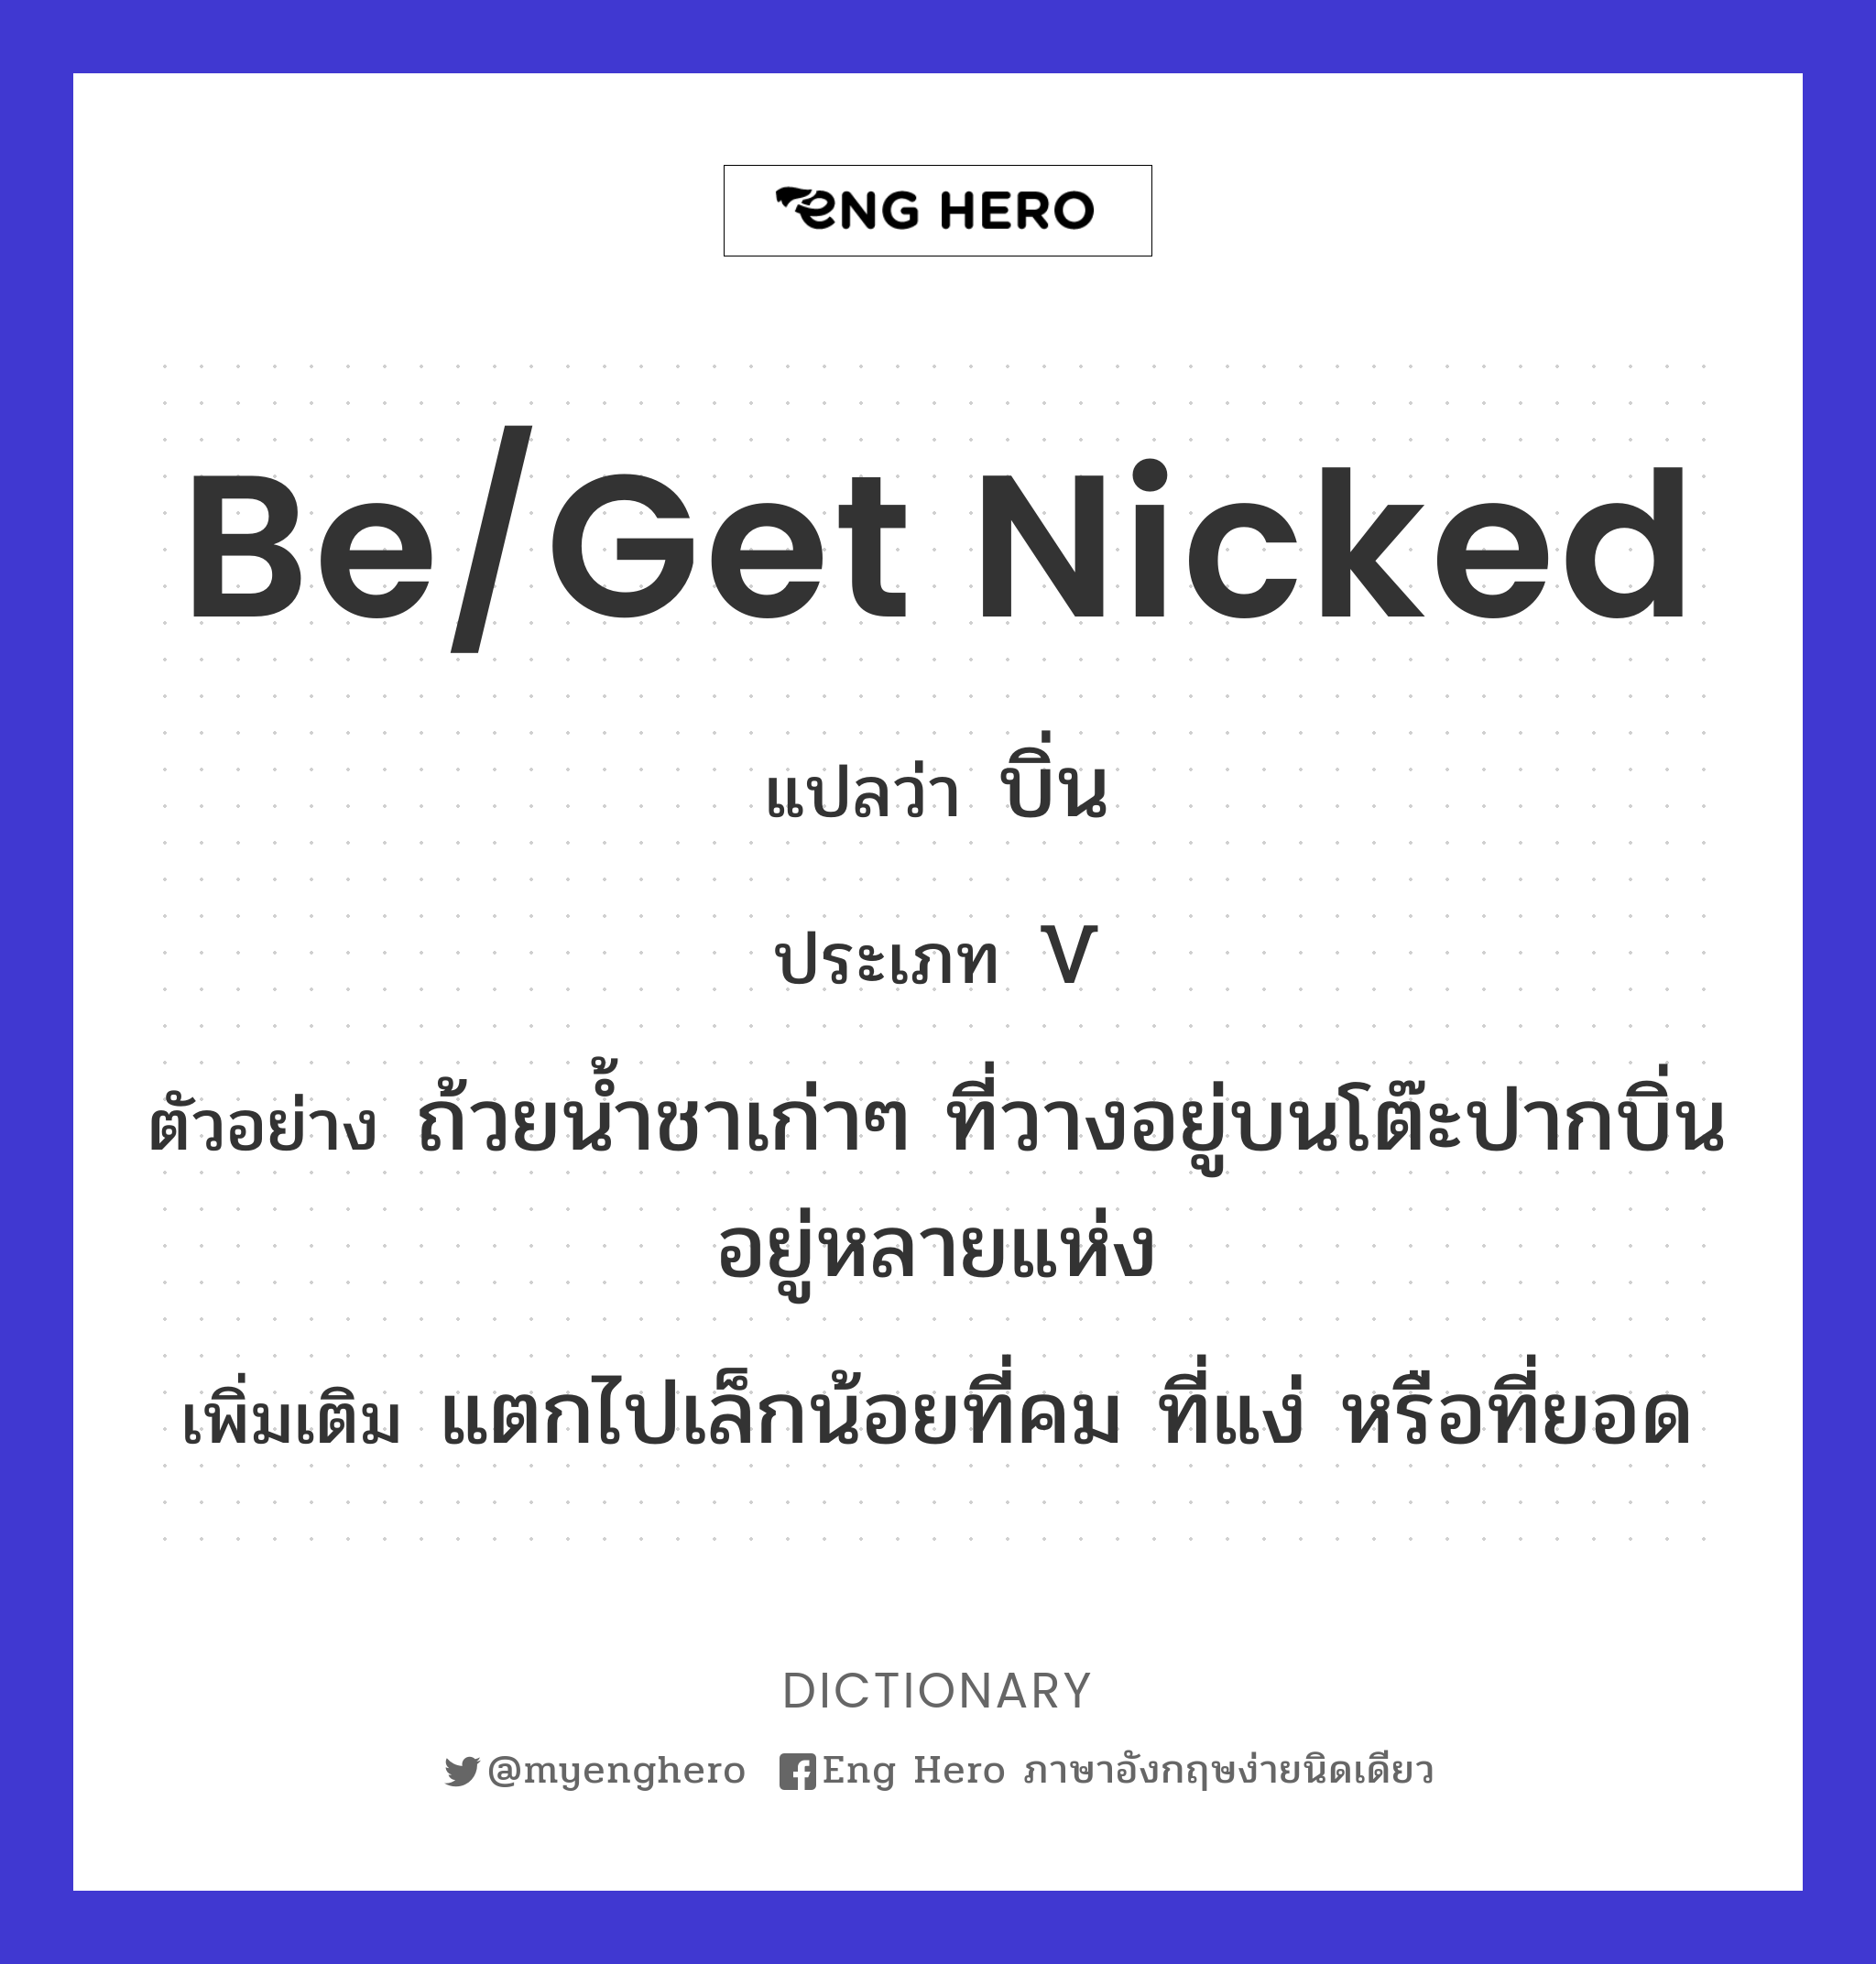 be/get nicked